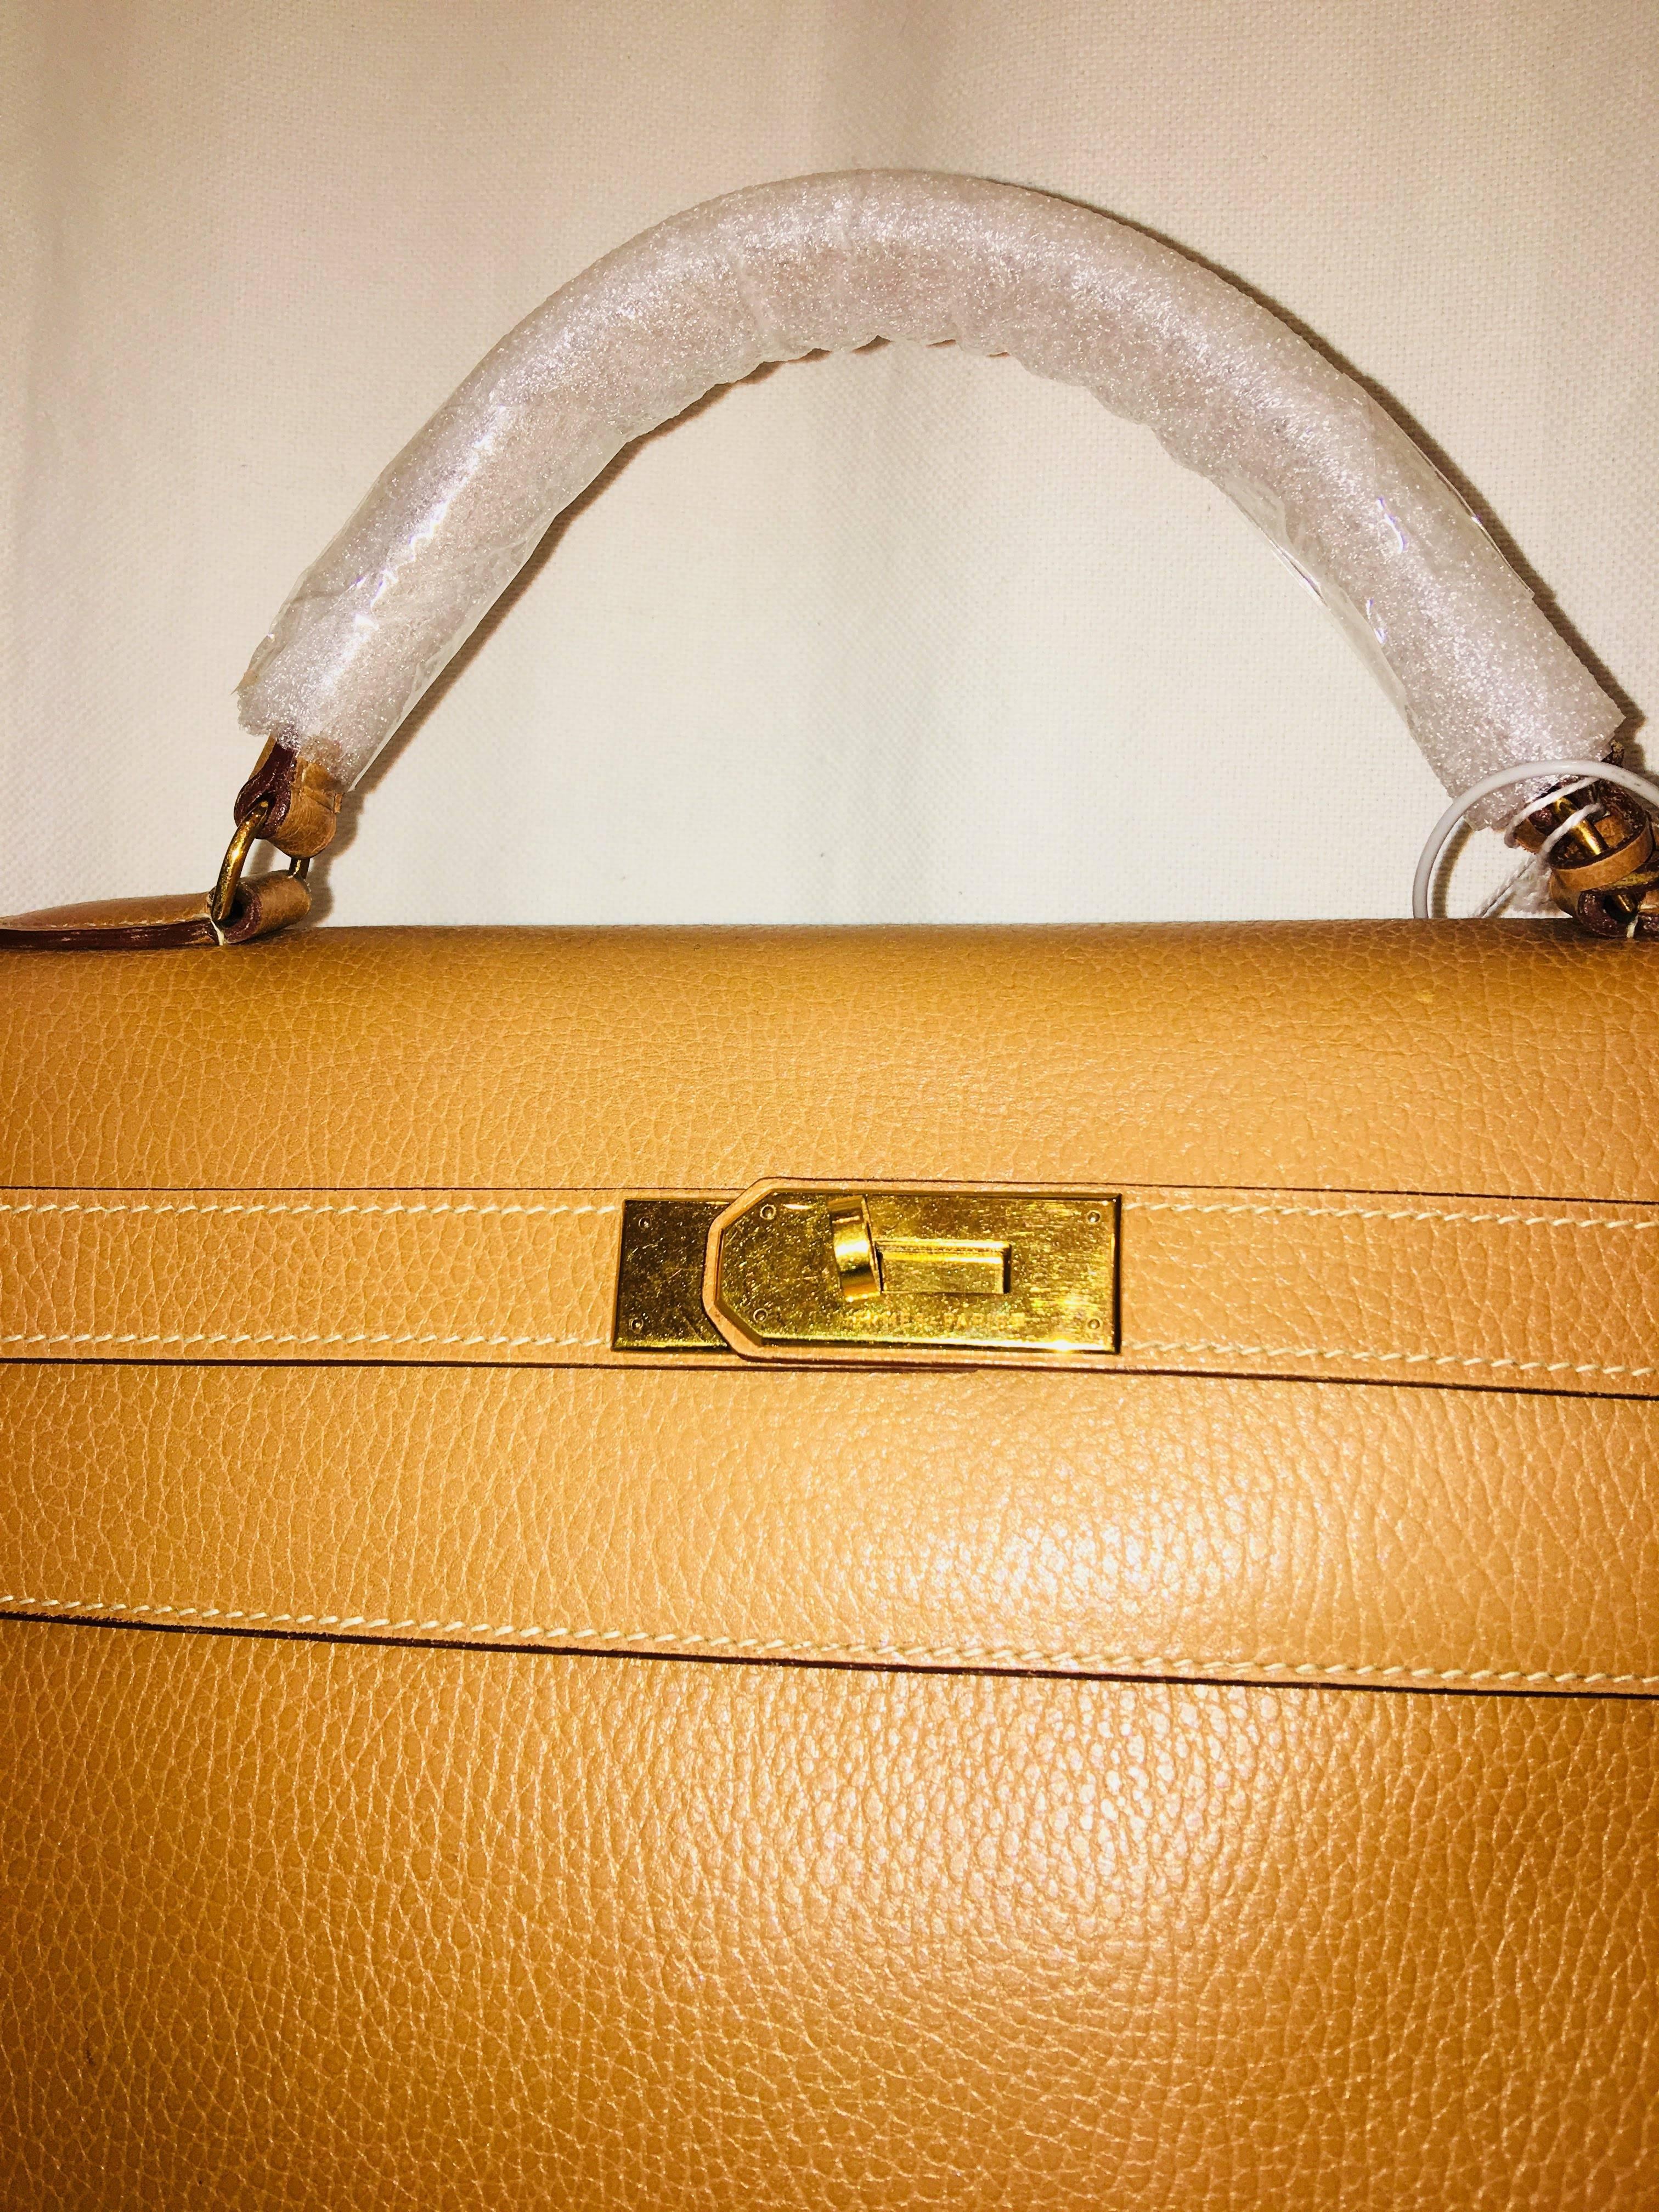 Hermés Gold Leather Kelly Bag, 40cm with Gold Hardware, Clemence Leather. 